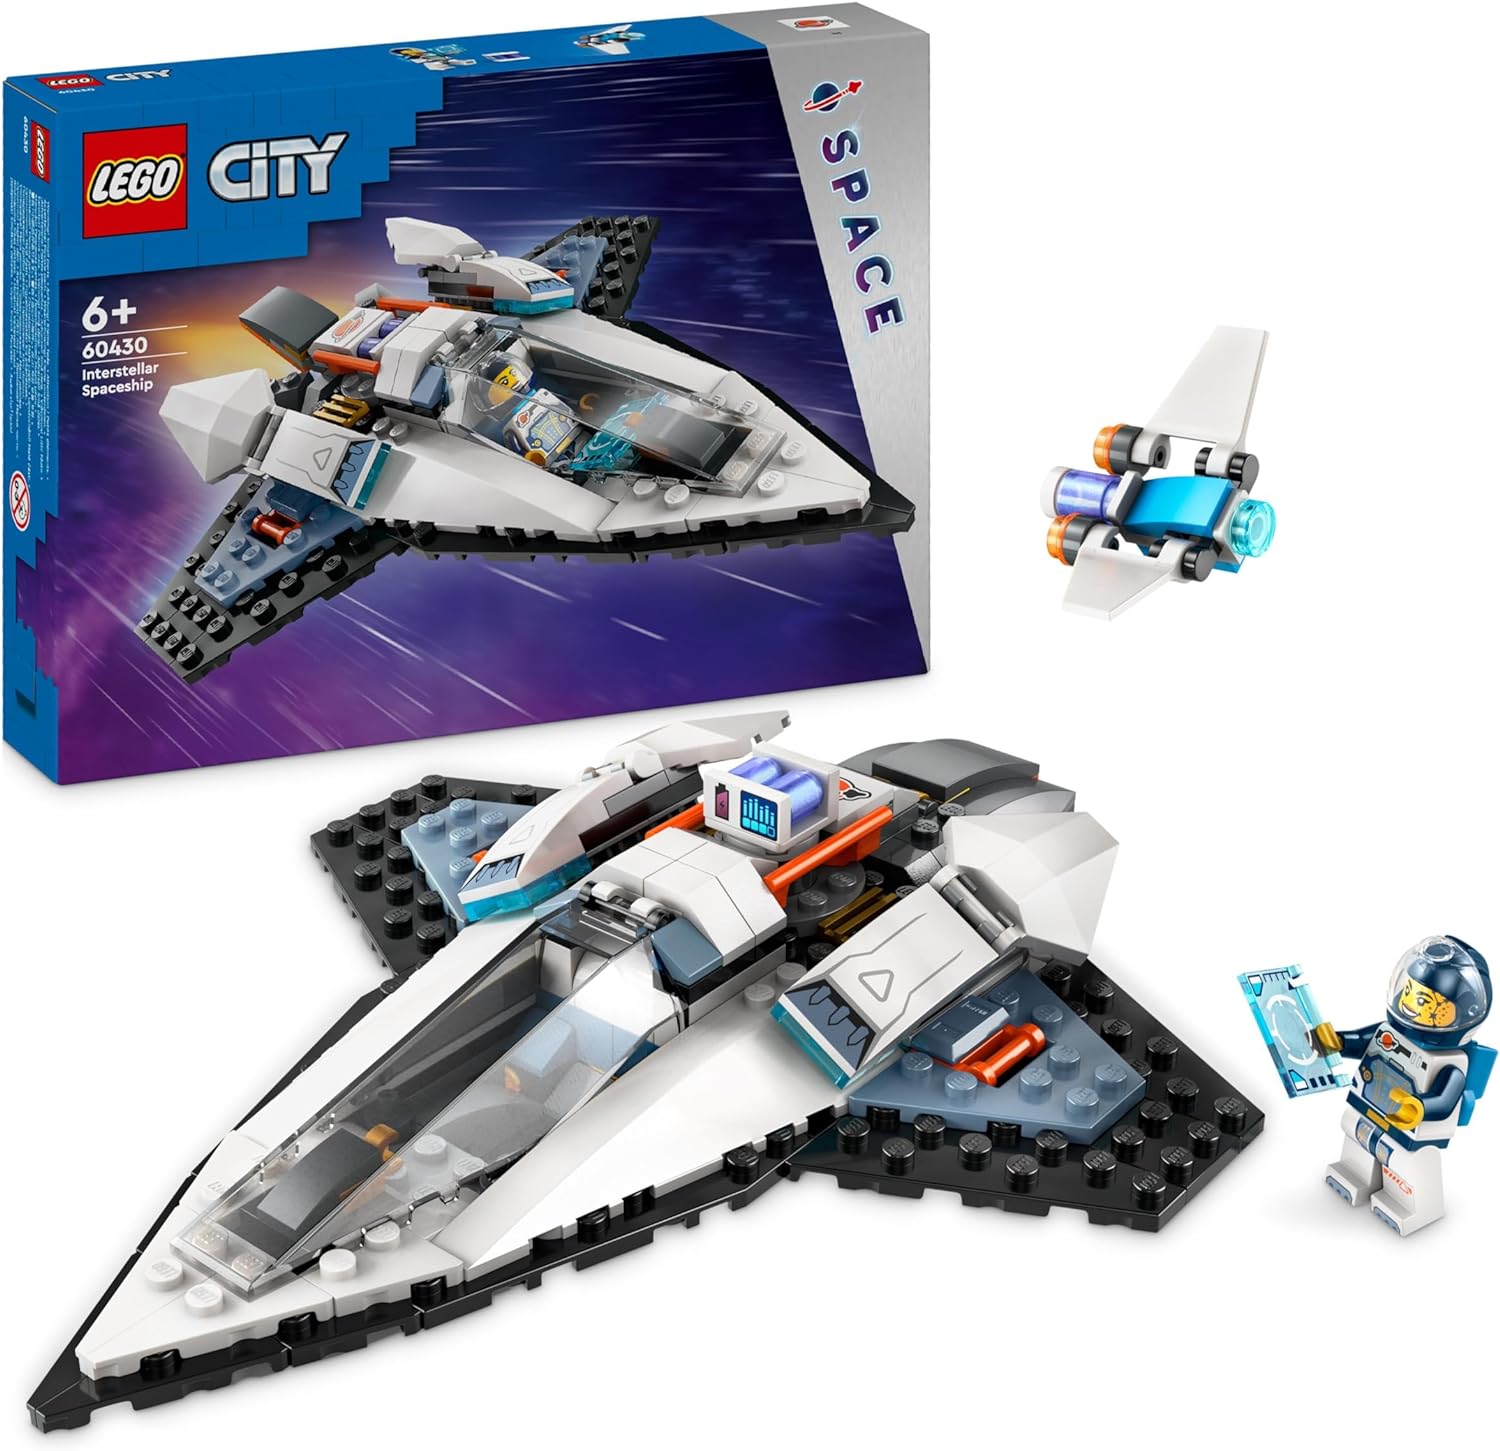 LEGO City Spaceship, Space Toy with Space Shuttle for Children to Building, Boys and Girls from 6 Years, Set with Astronaut Figure 60430